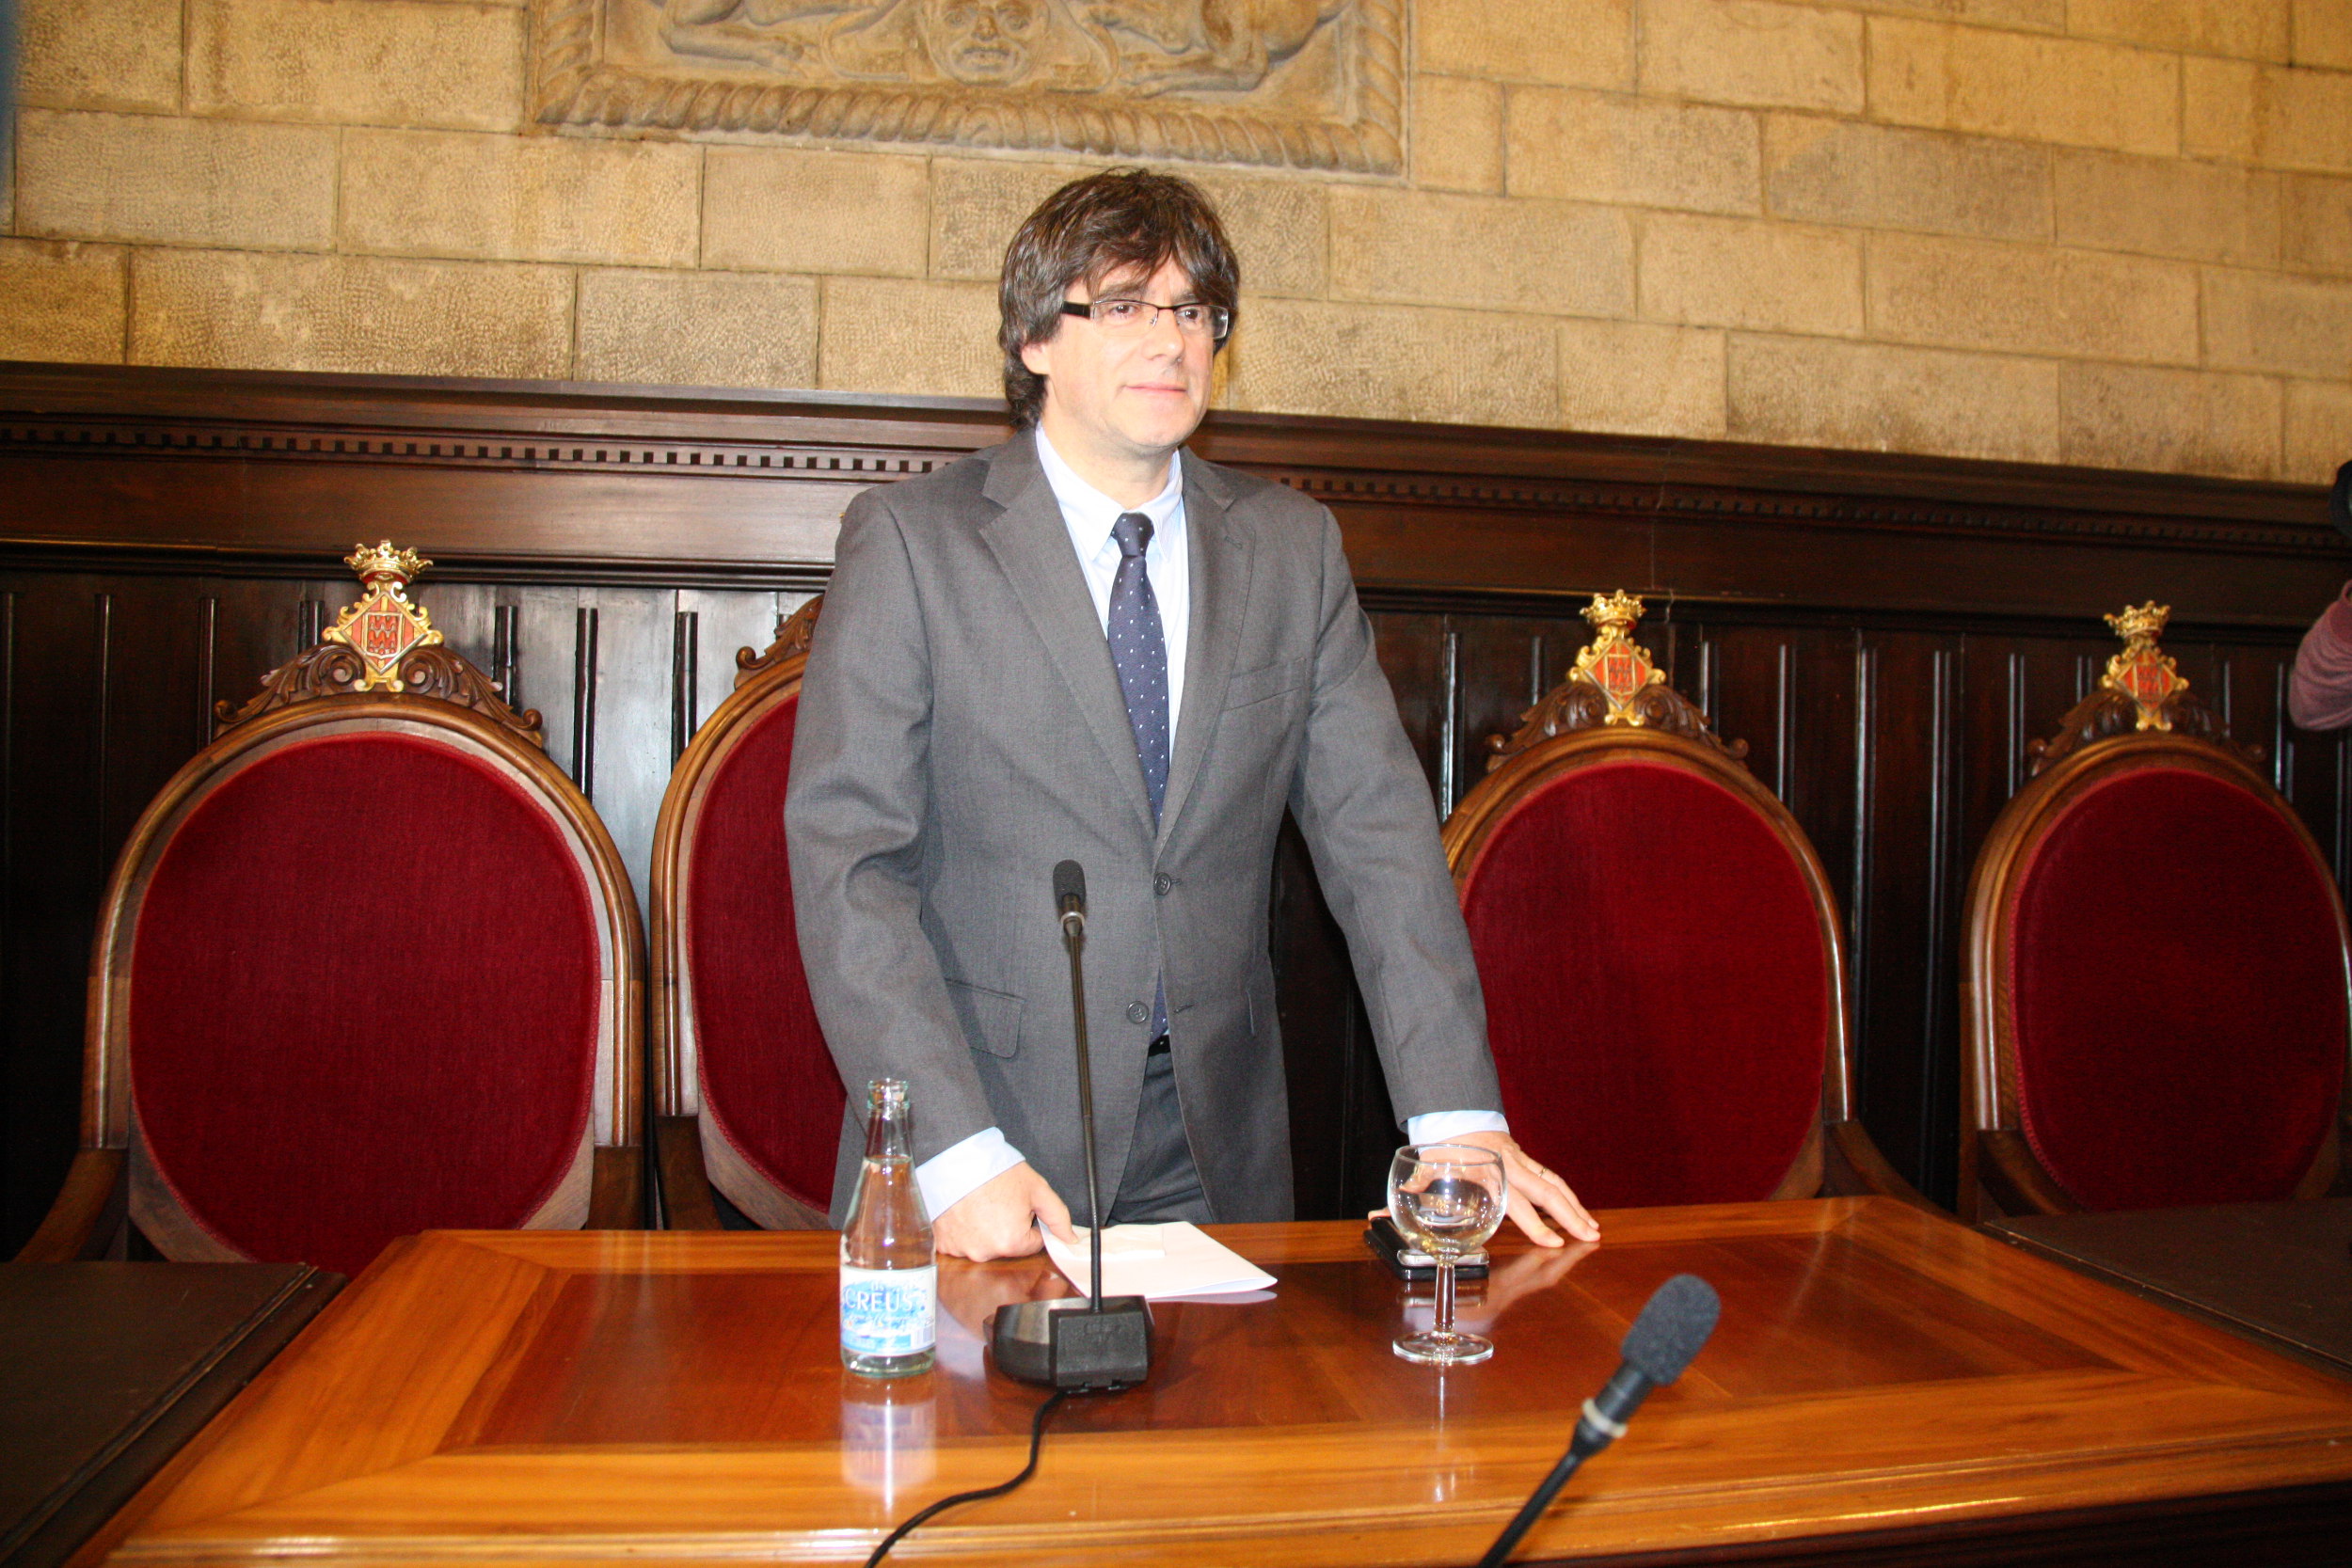 The recently invested as new Catalan President, Carles Puigdemont resigned from Mayor of the city of Girona (by ACN)